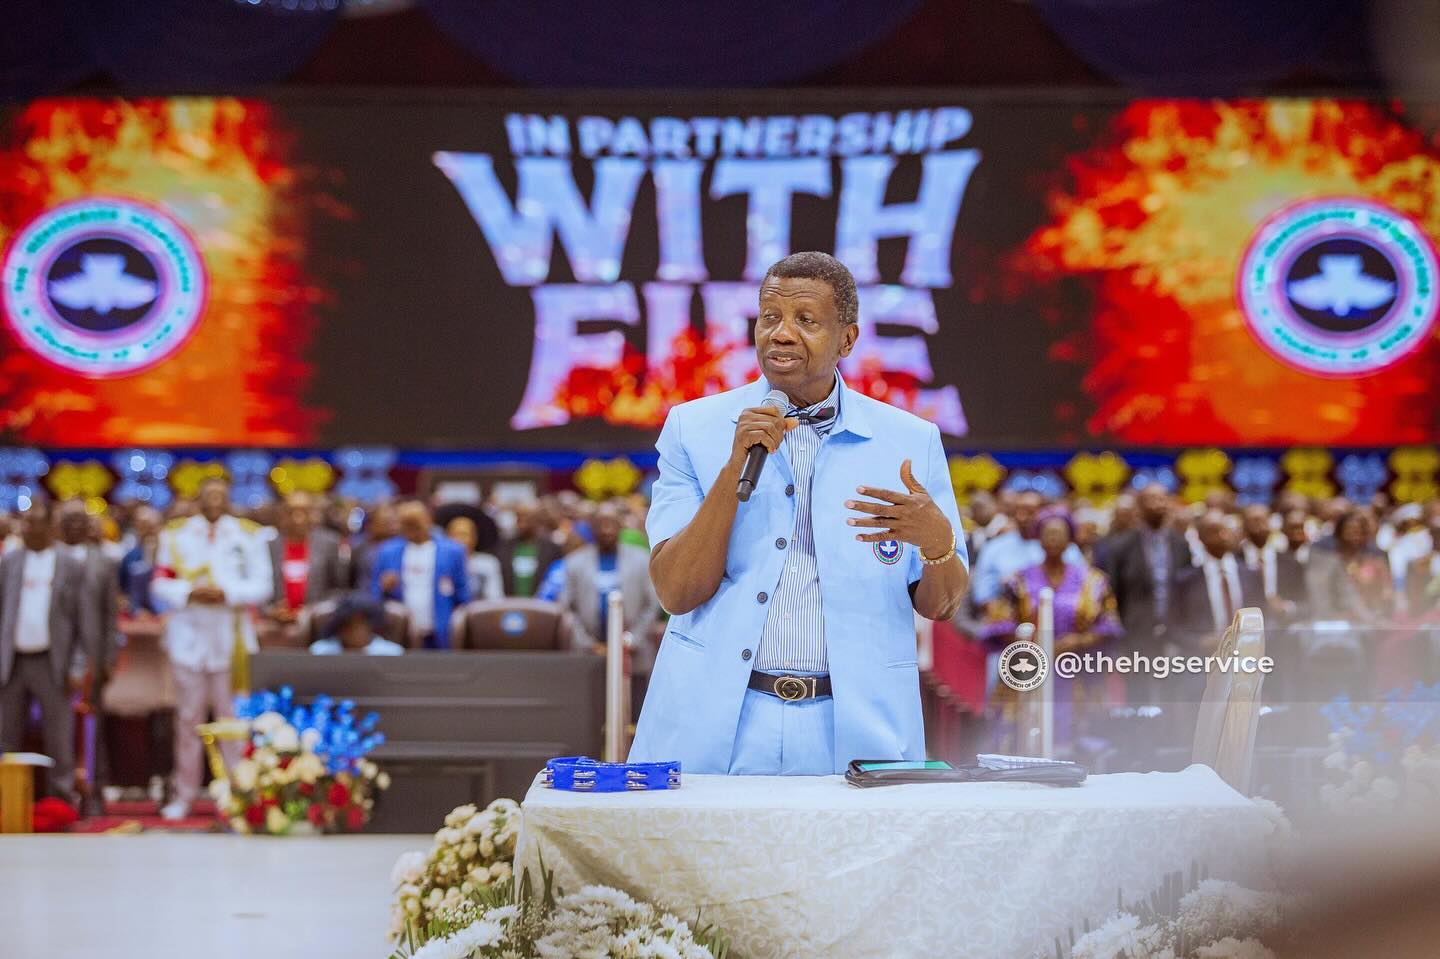 You are currently viewing In Partnership with Fire (by Pastor Adeboye)